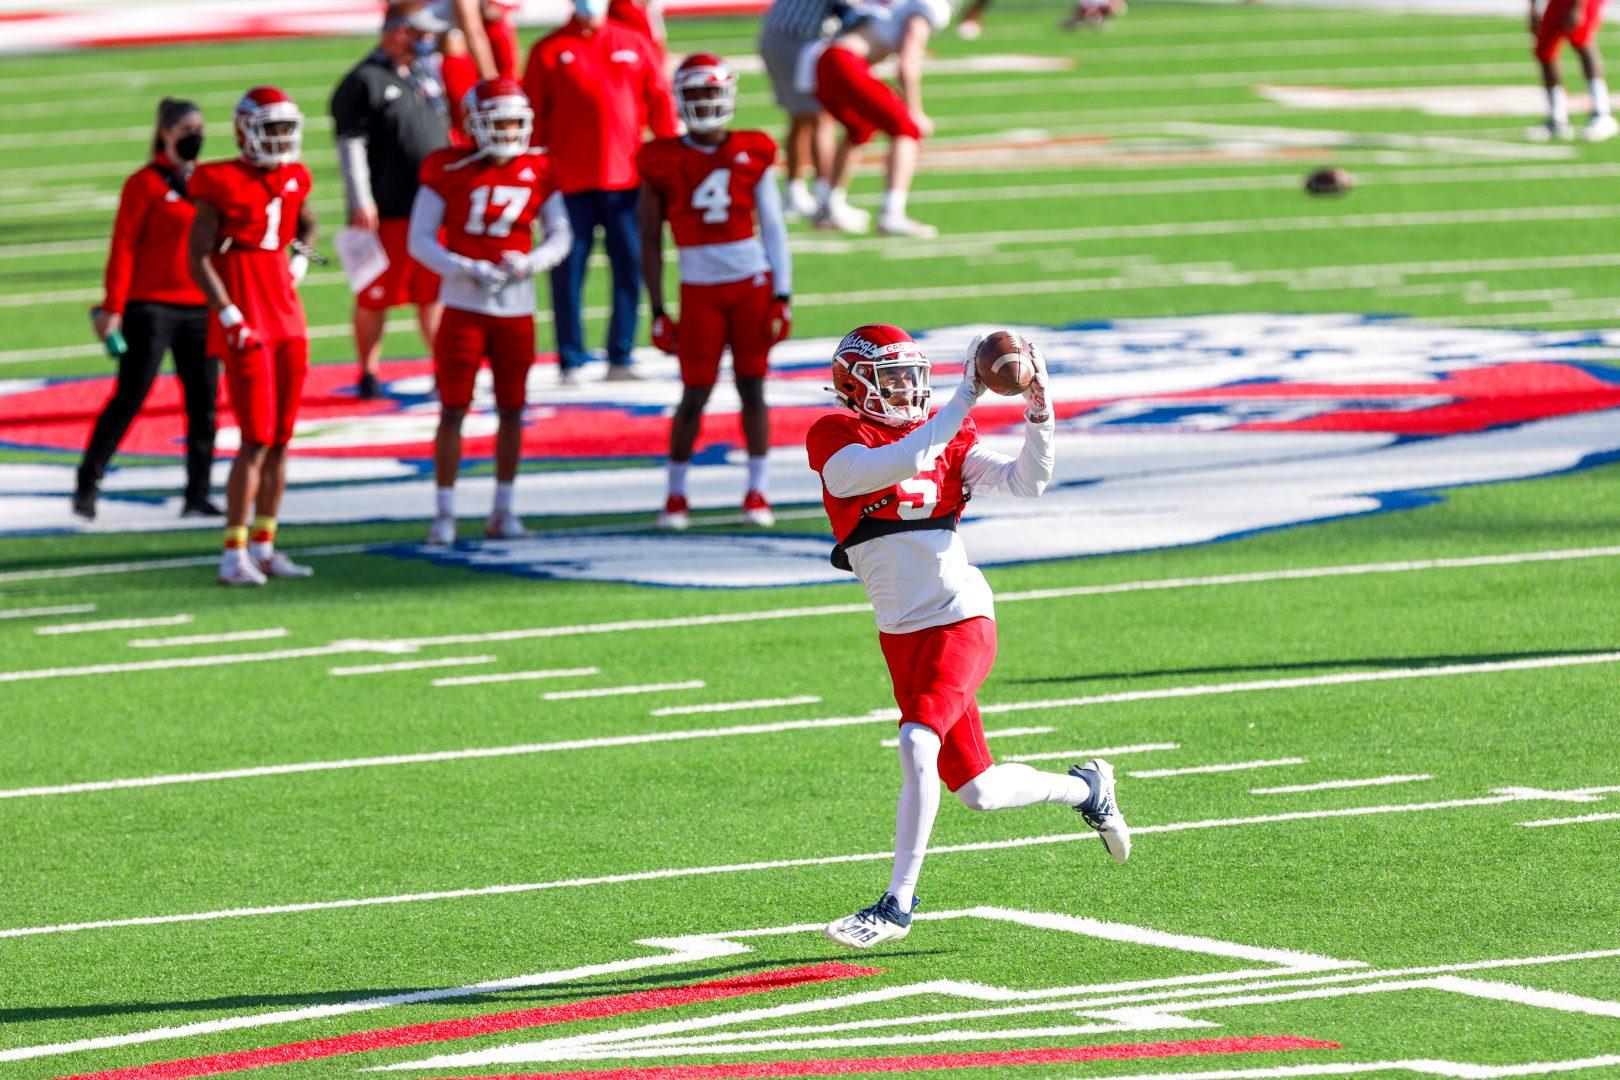 Fresno+State+wide+receiver+Jalen+Cropper+catches+the+ball+during+practice+No.+4+of+their+15+spring+practices+at+Bulldog+Stadium+on+Friday%2C+March+26%2C+2021.+%28Vendila+Yang%2FThe+Collegian%29